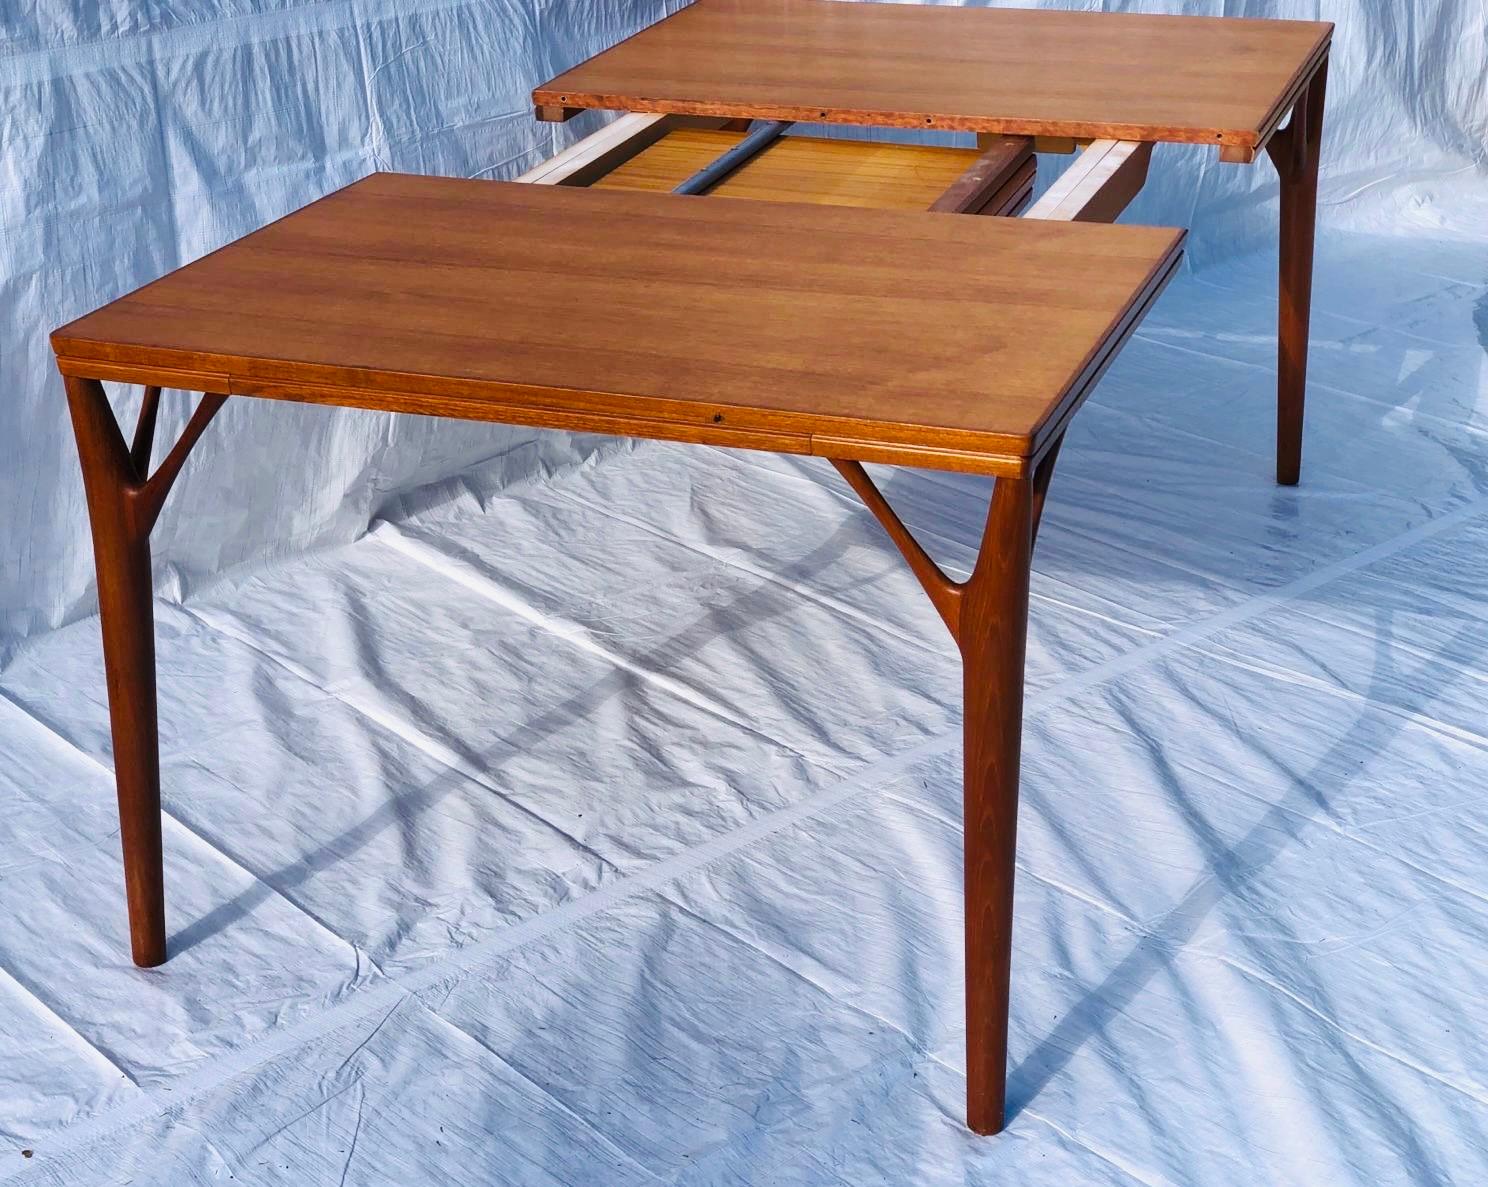 1960s Danish Teak Willy Sigh 'Tree Leg' Dining Table Model 180 by H Sigh & Søn  For Sale 4